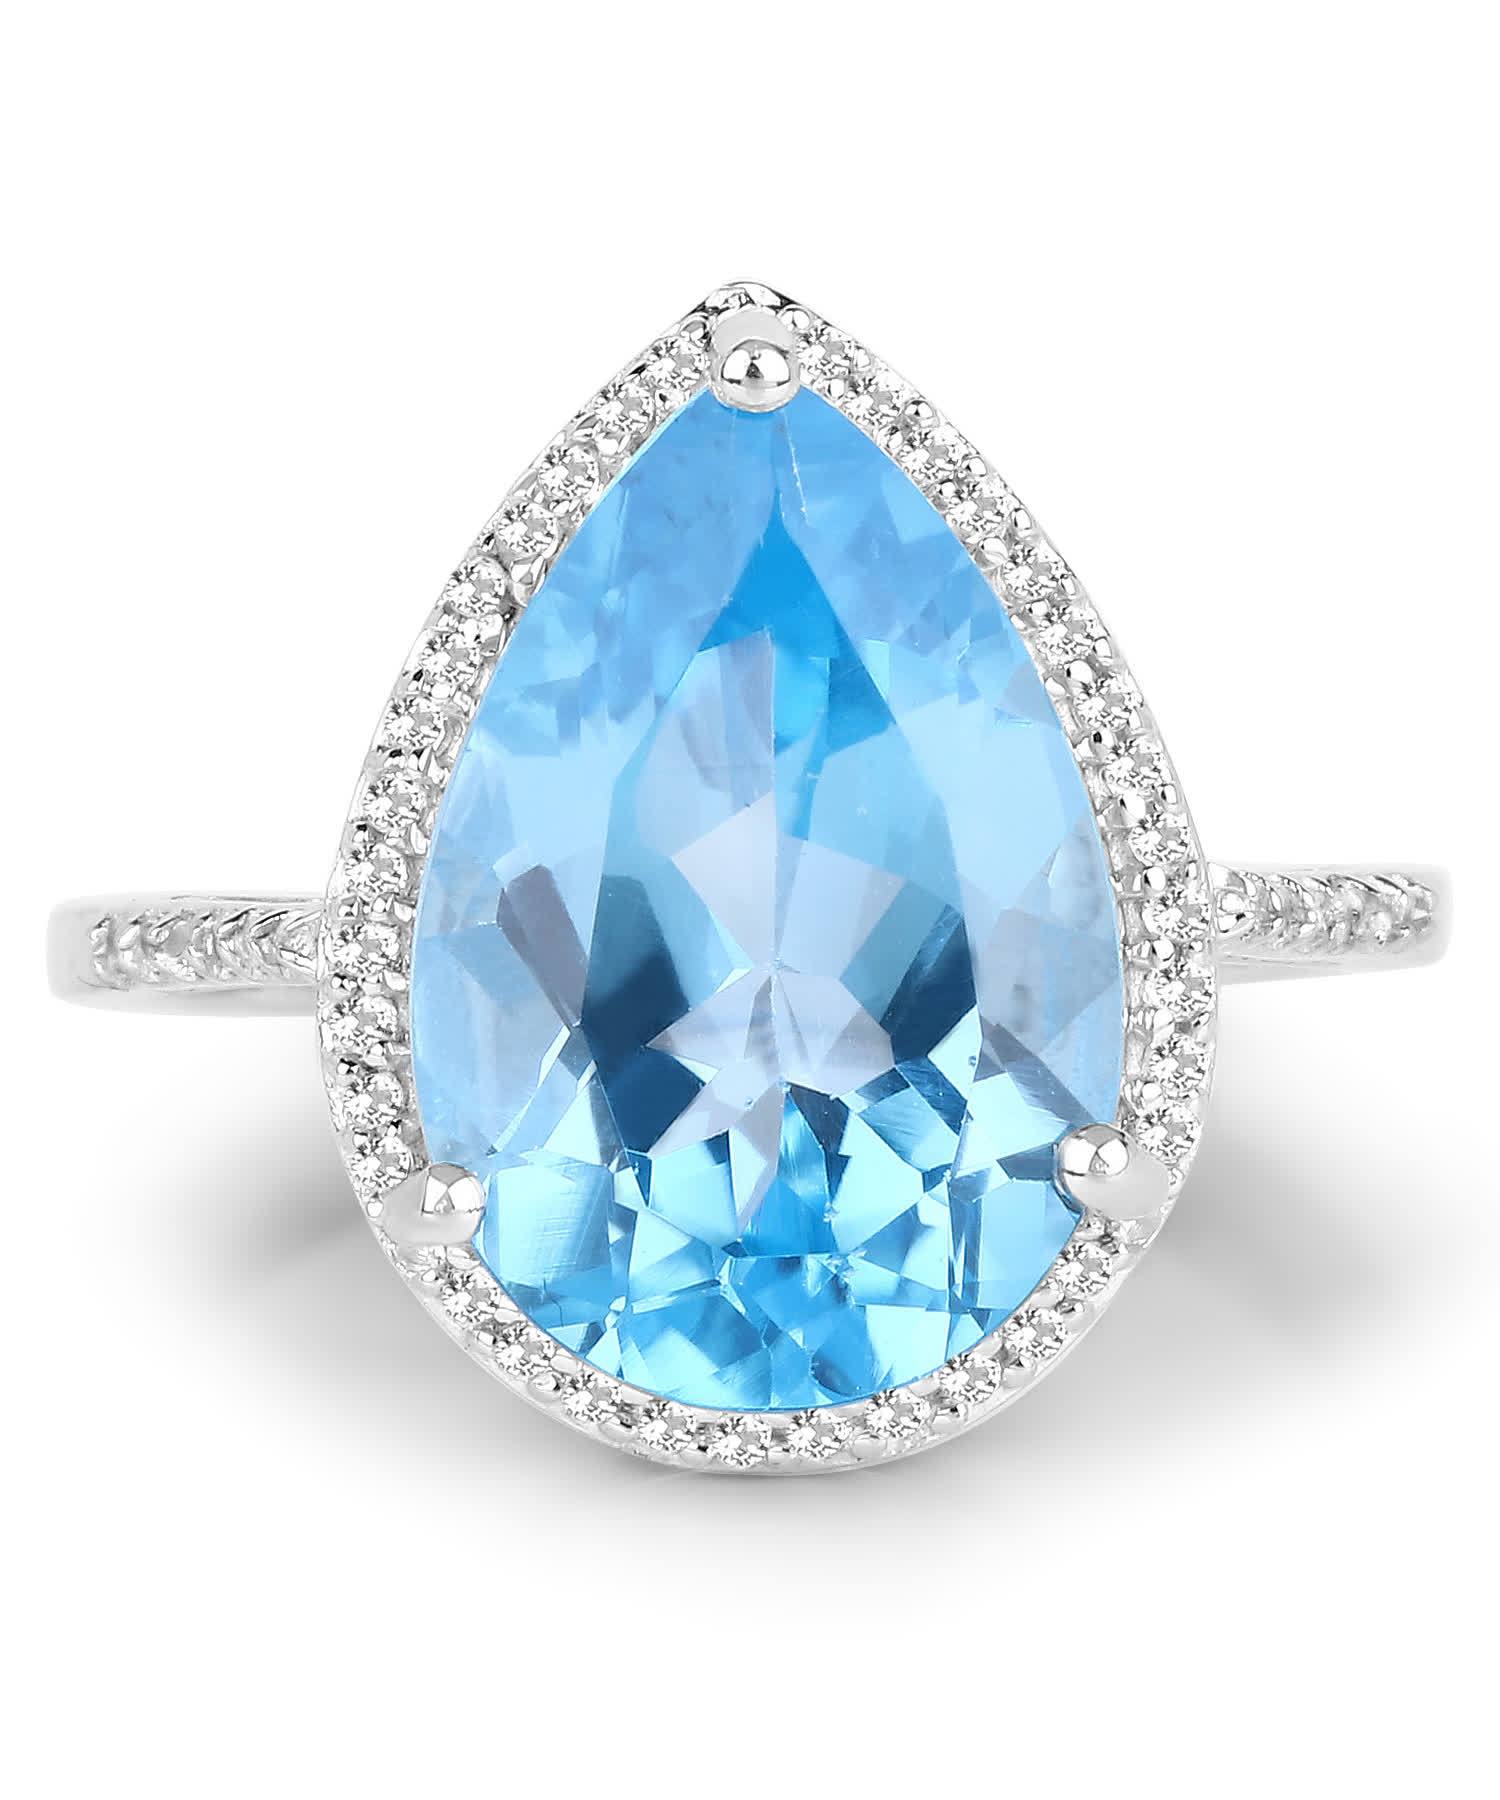 6.77ctw Natural Swiss Blue Topaz Rhodium Plated 925 Sterling Silver Halo Cocktail Ring View 3